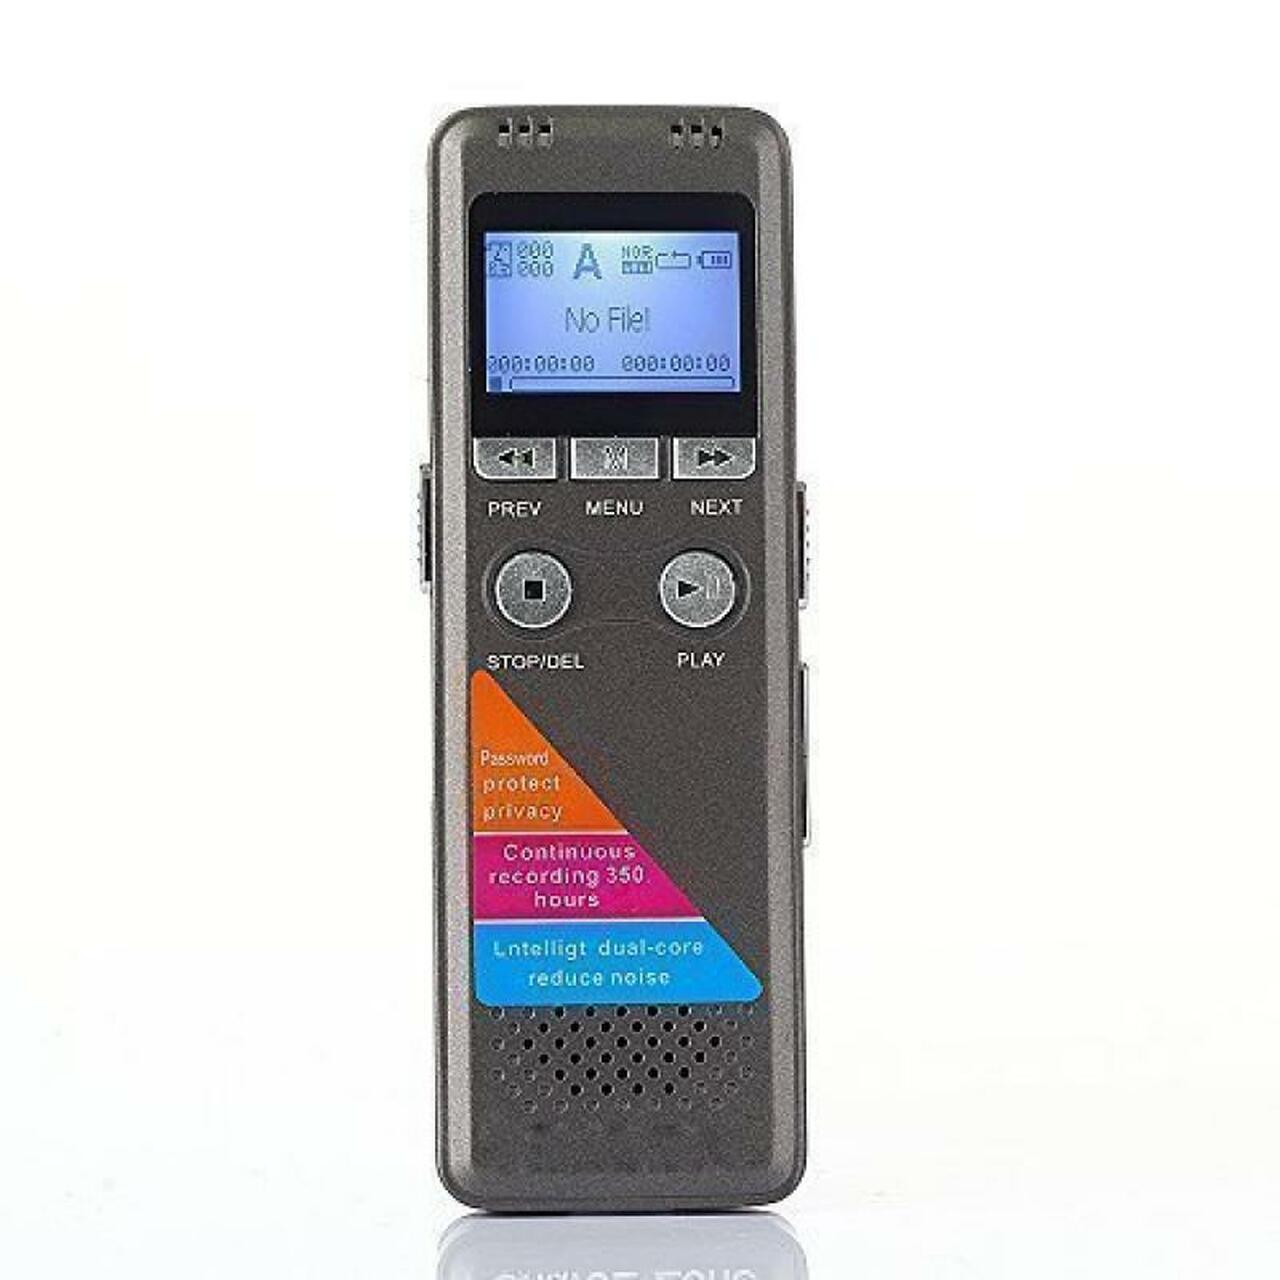 Spy Spot Digital Voice Activated Audio Recorder with Playback 8GB Built-in Memory - Long Battery Recording Dictaphone, Classrooms Lectures, Meetings, Interviews Rechargeable Easy to Use